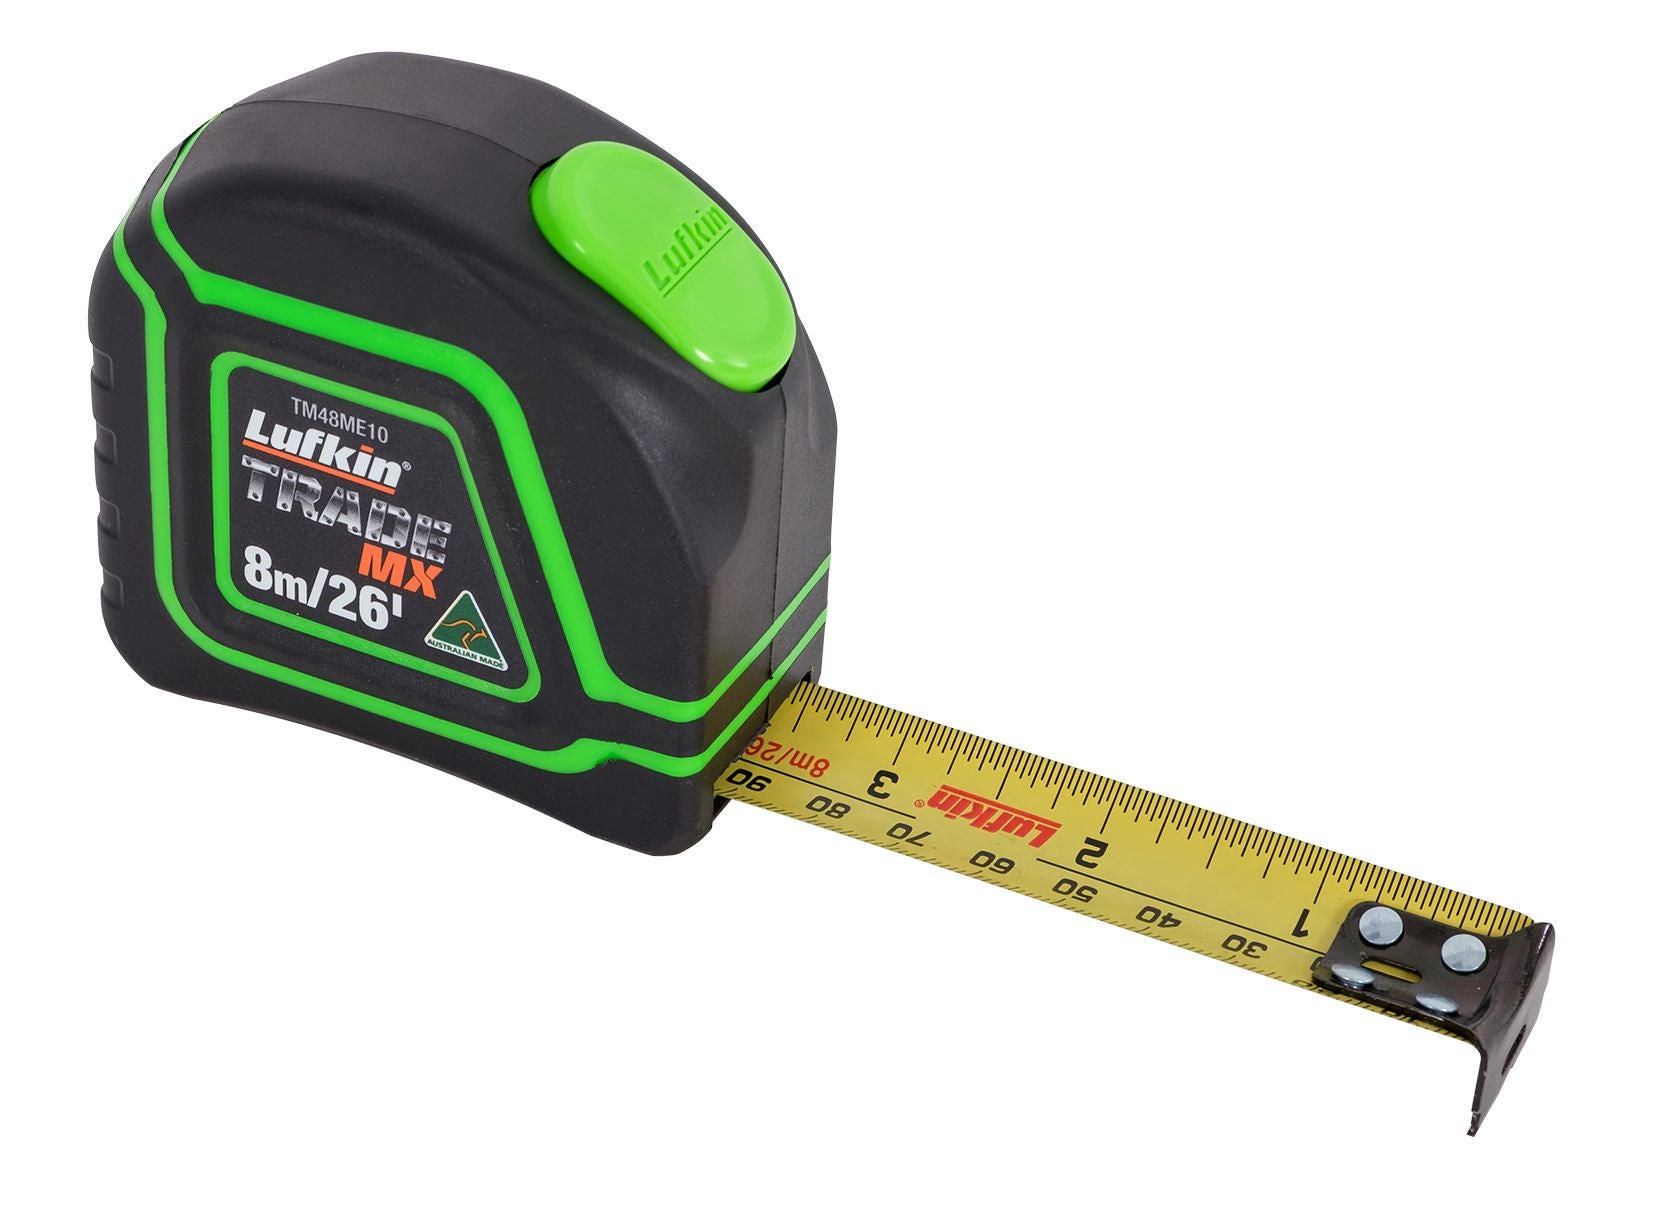 8m X 25mm Trade MX Tape Measure TM48ME10 by Lufkin